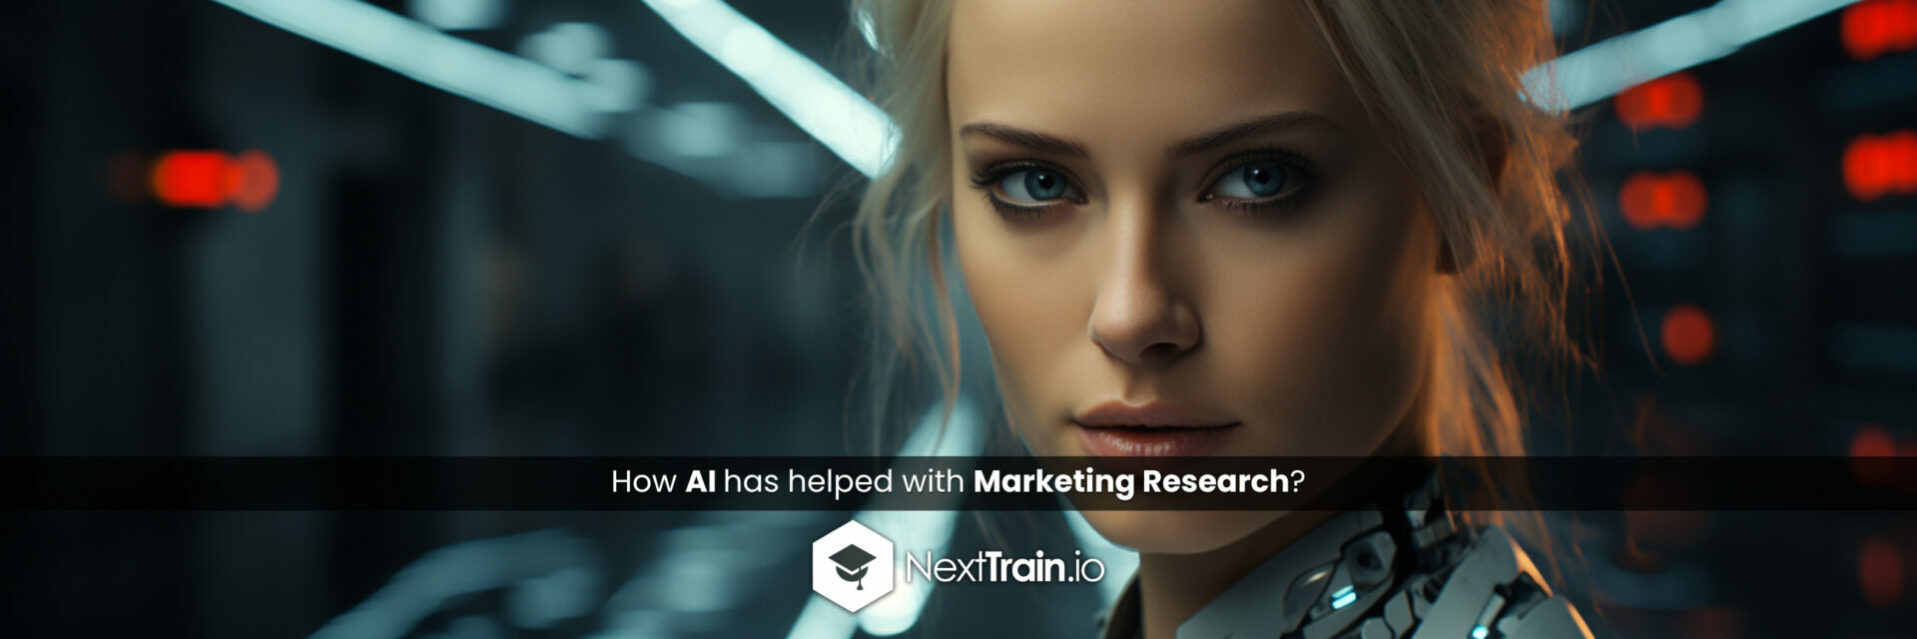 How AI has helped with Marketing Research?